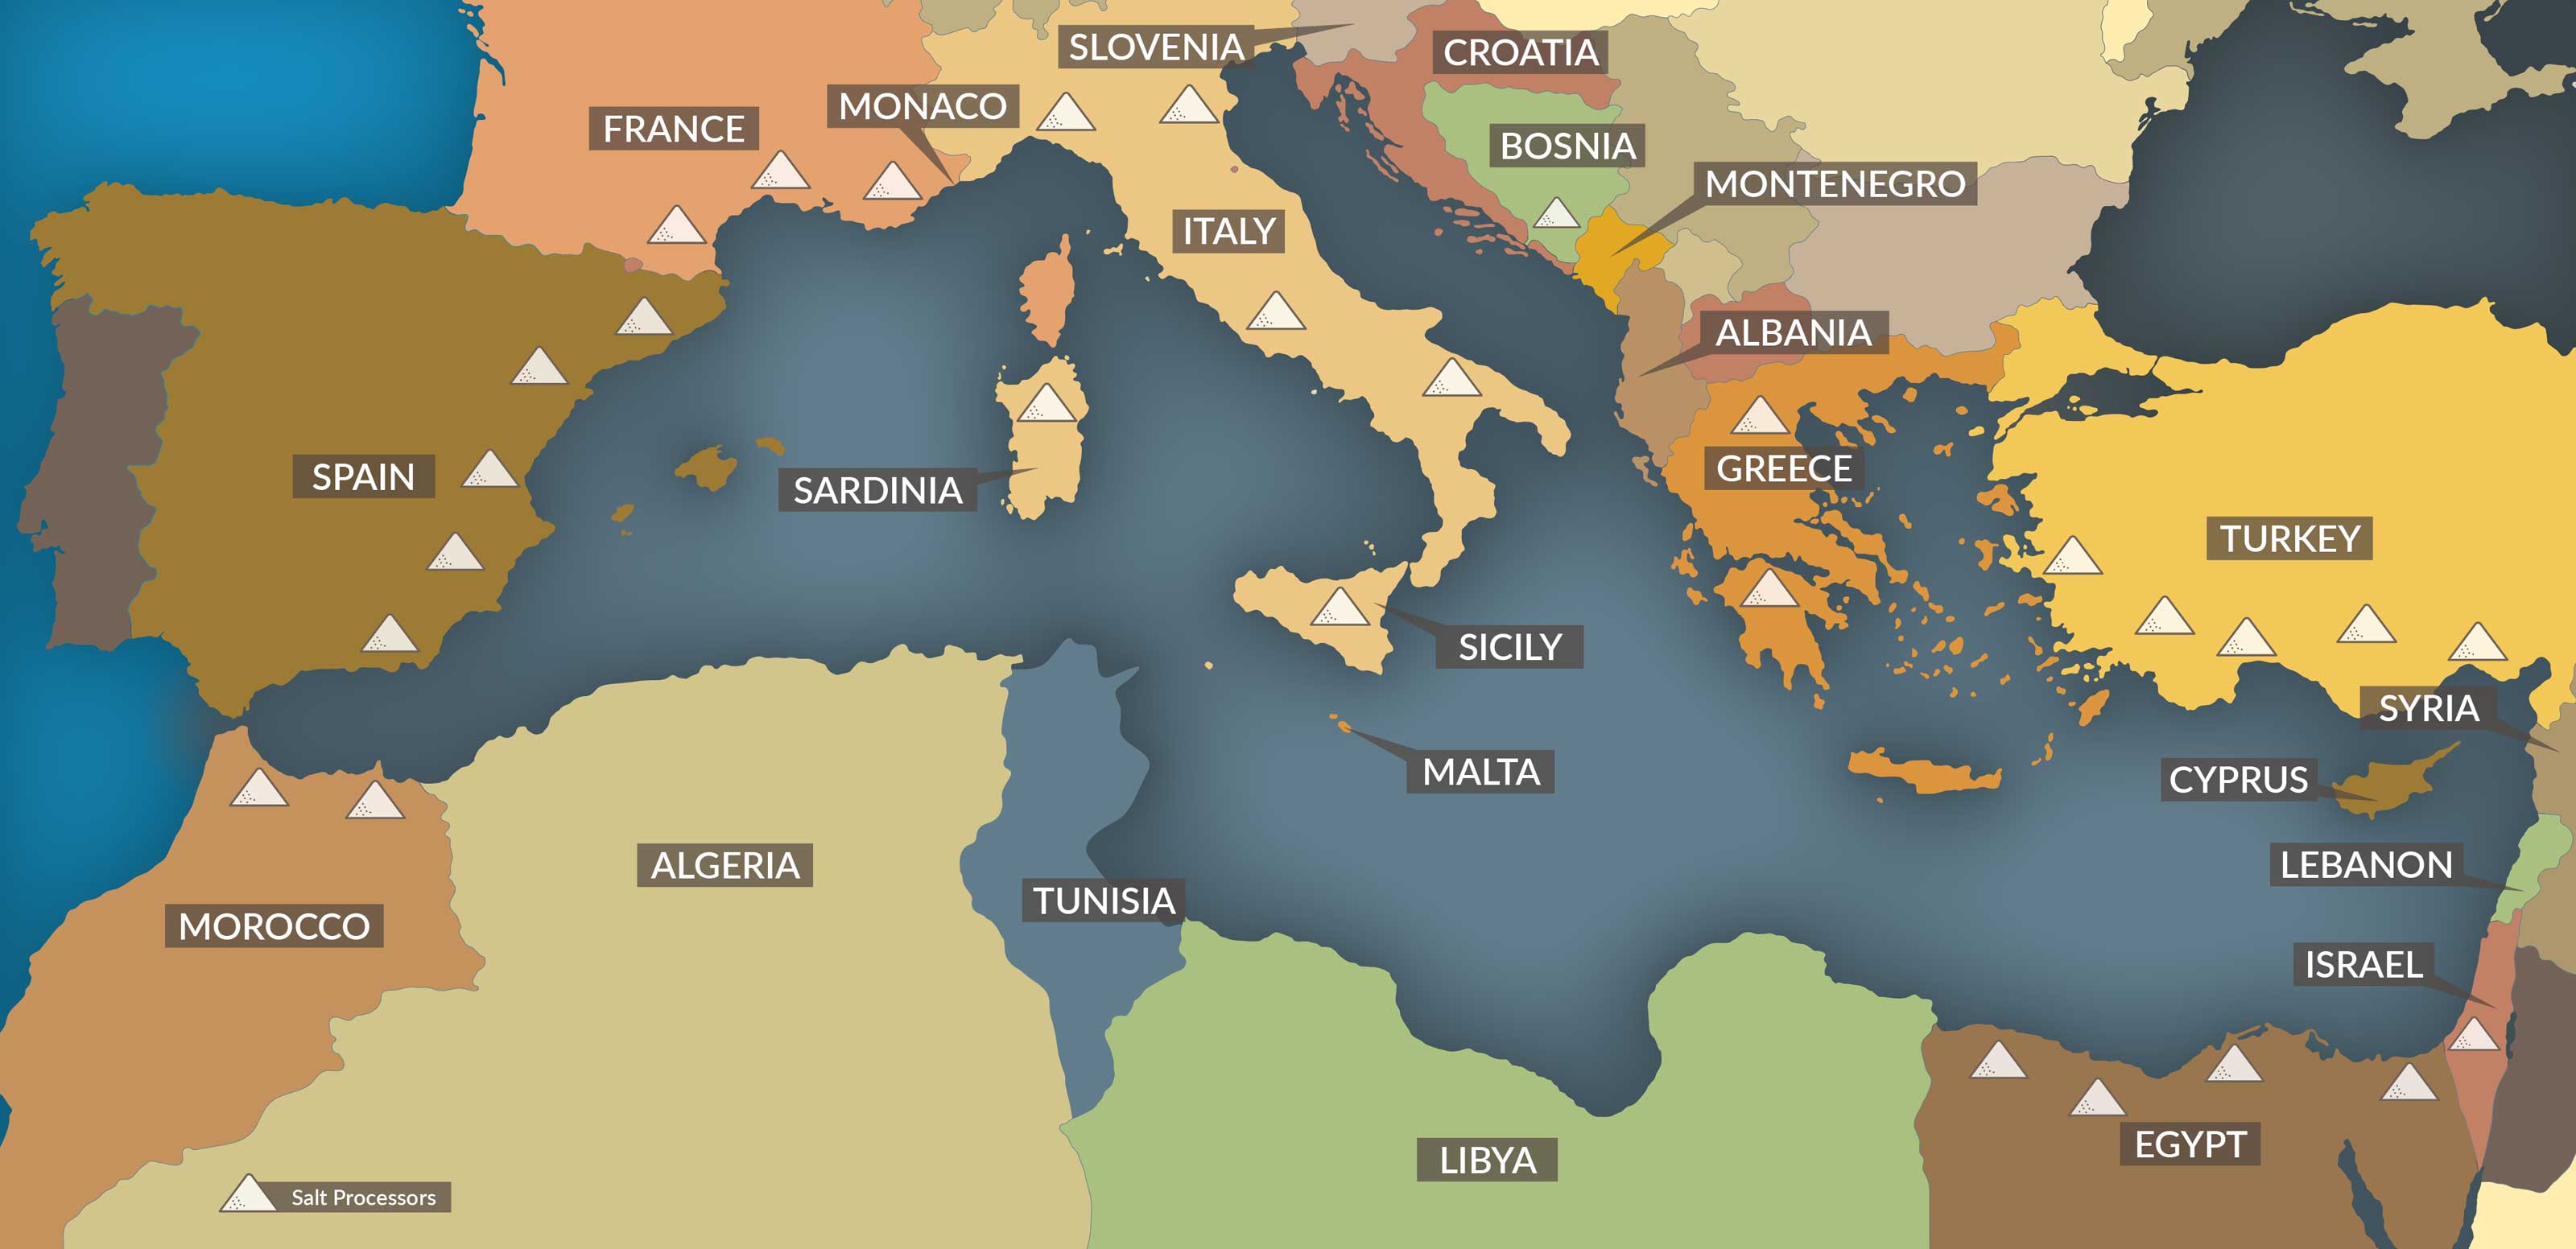 Countries and salt producers bordering the Mediterranean Sea